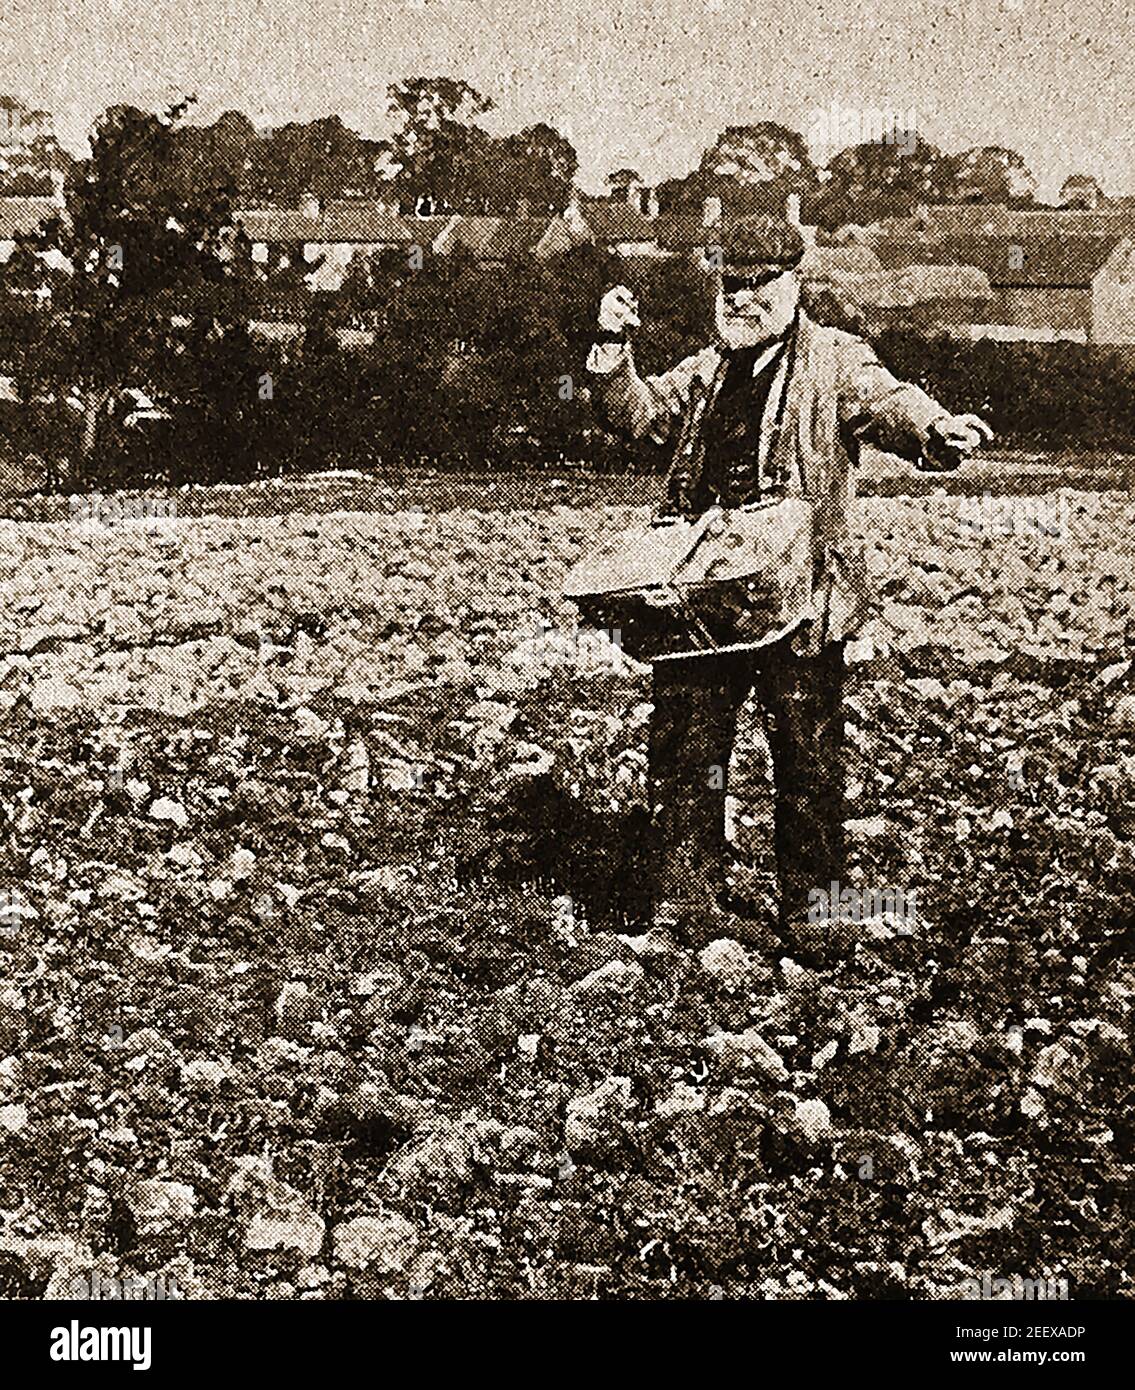 An old press photograph showing a farmer broadcasting seeds by hand circa 1930's Stock Photo